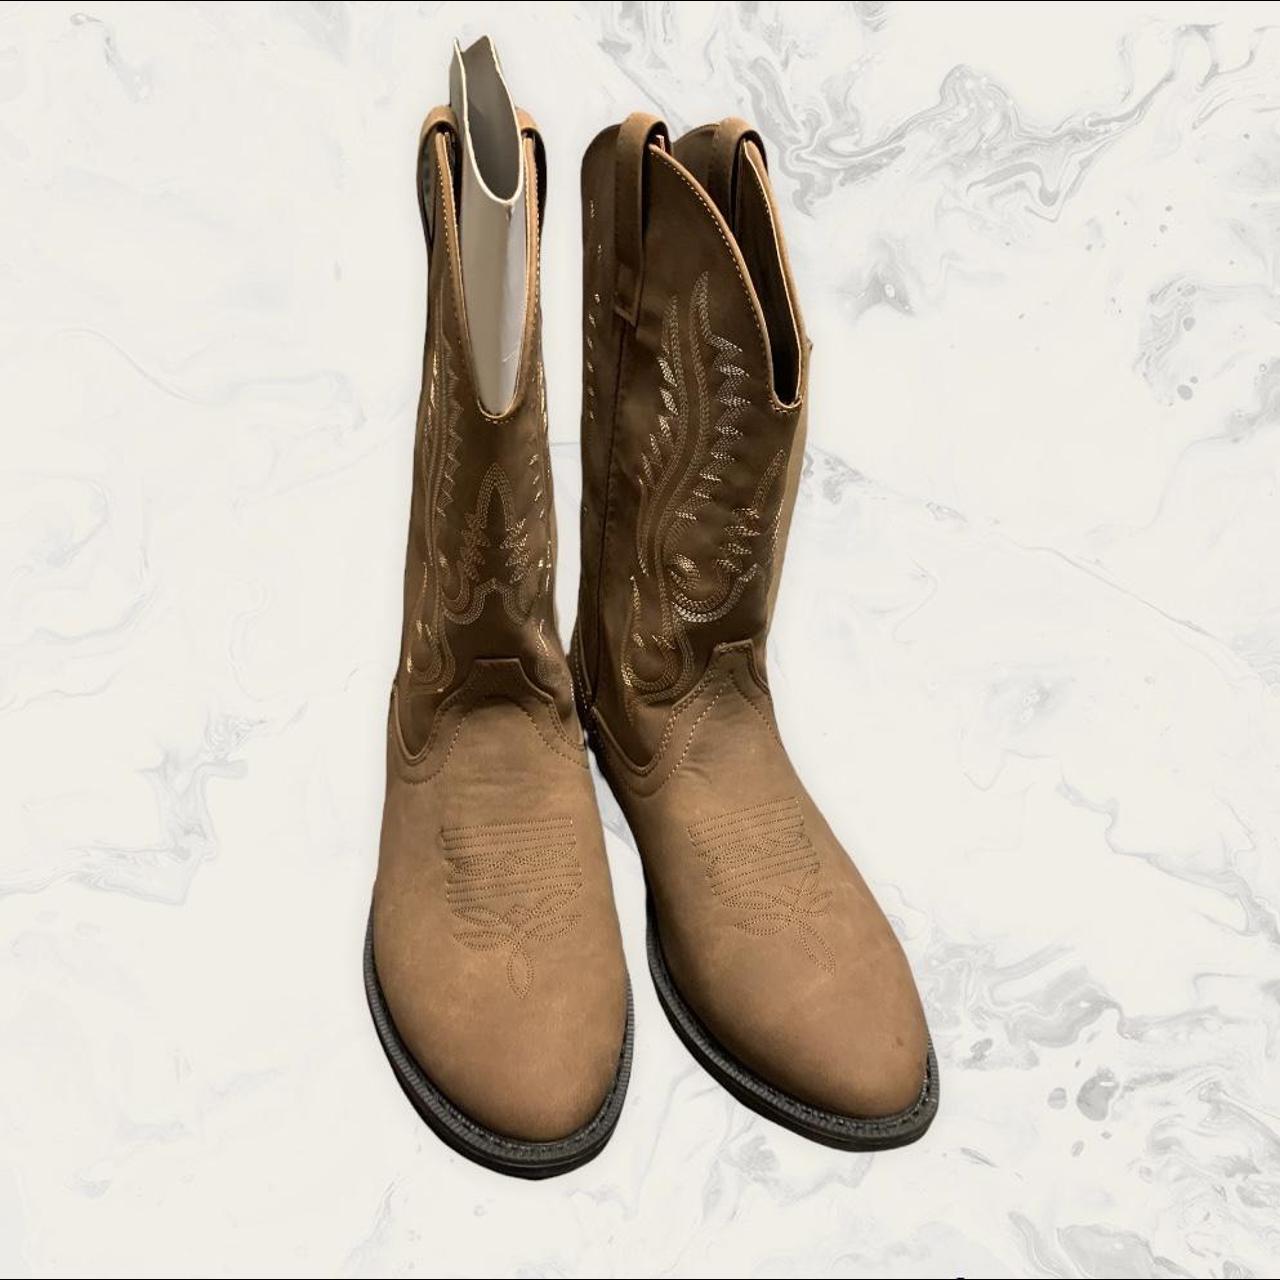 Women's Brown and Tan Boots (2)